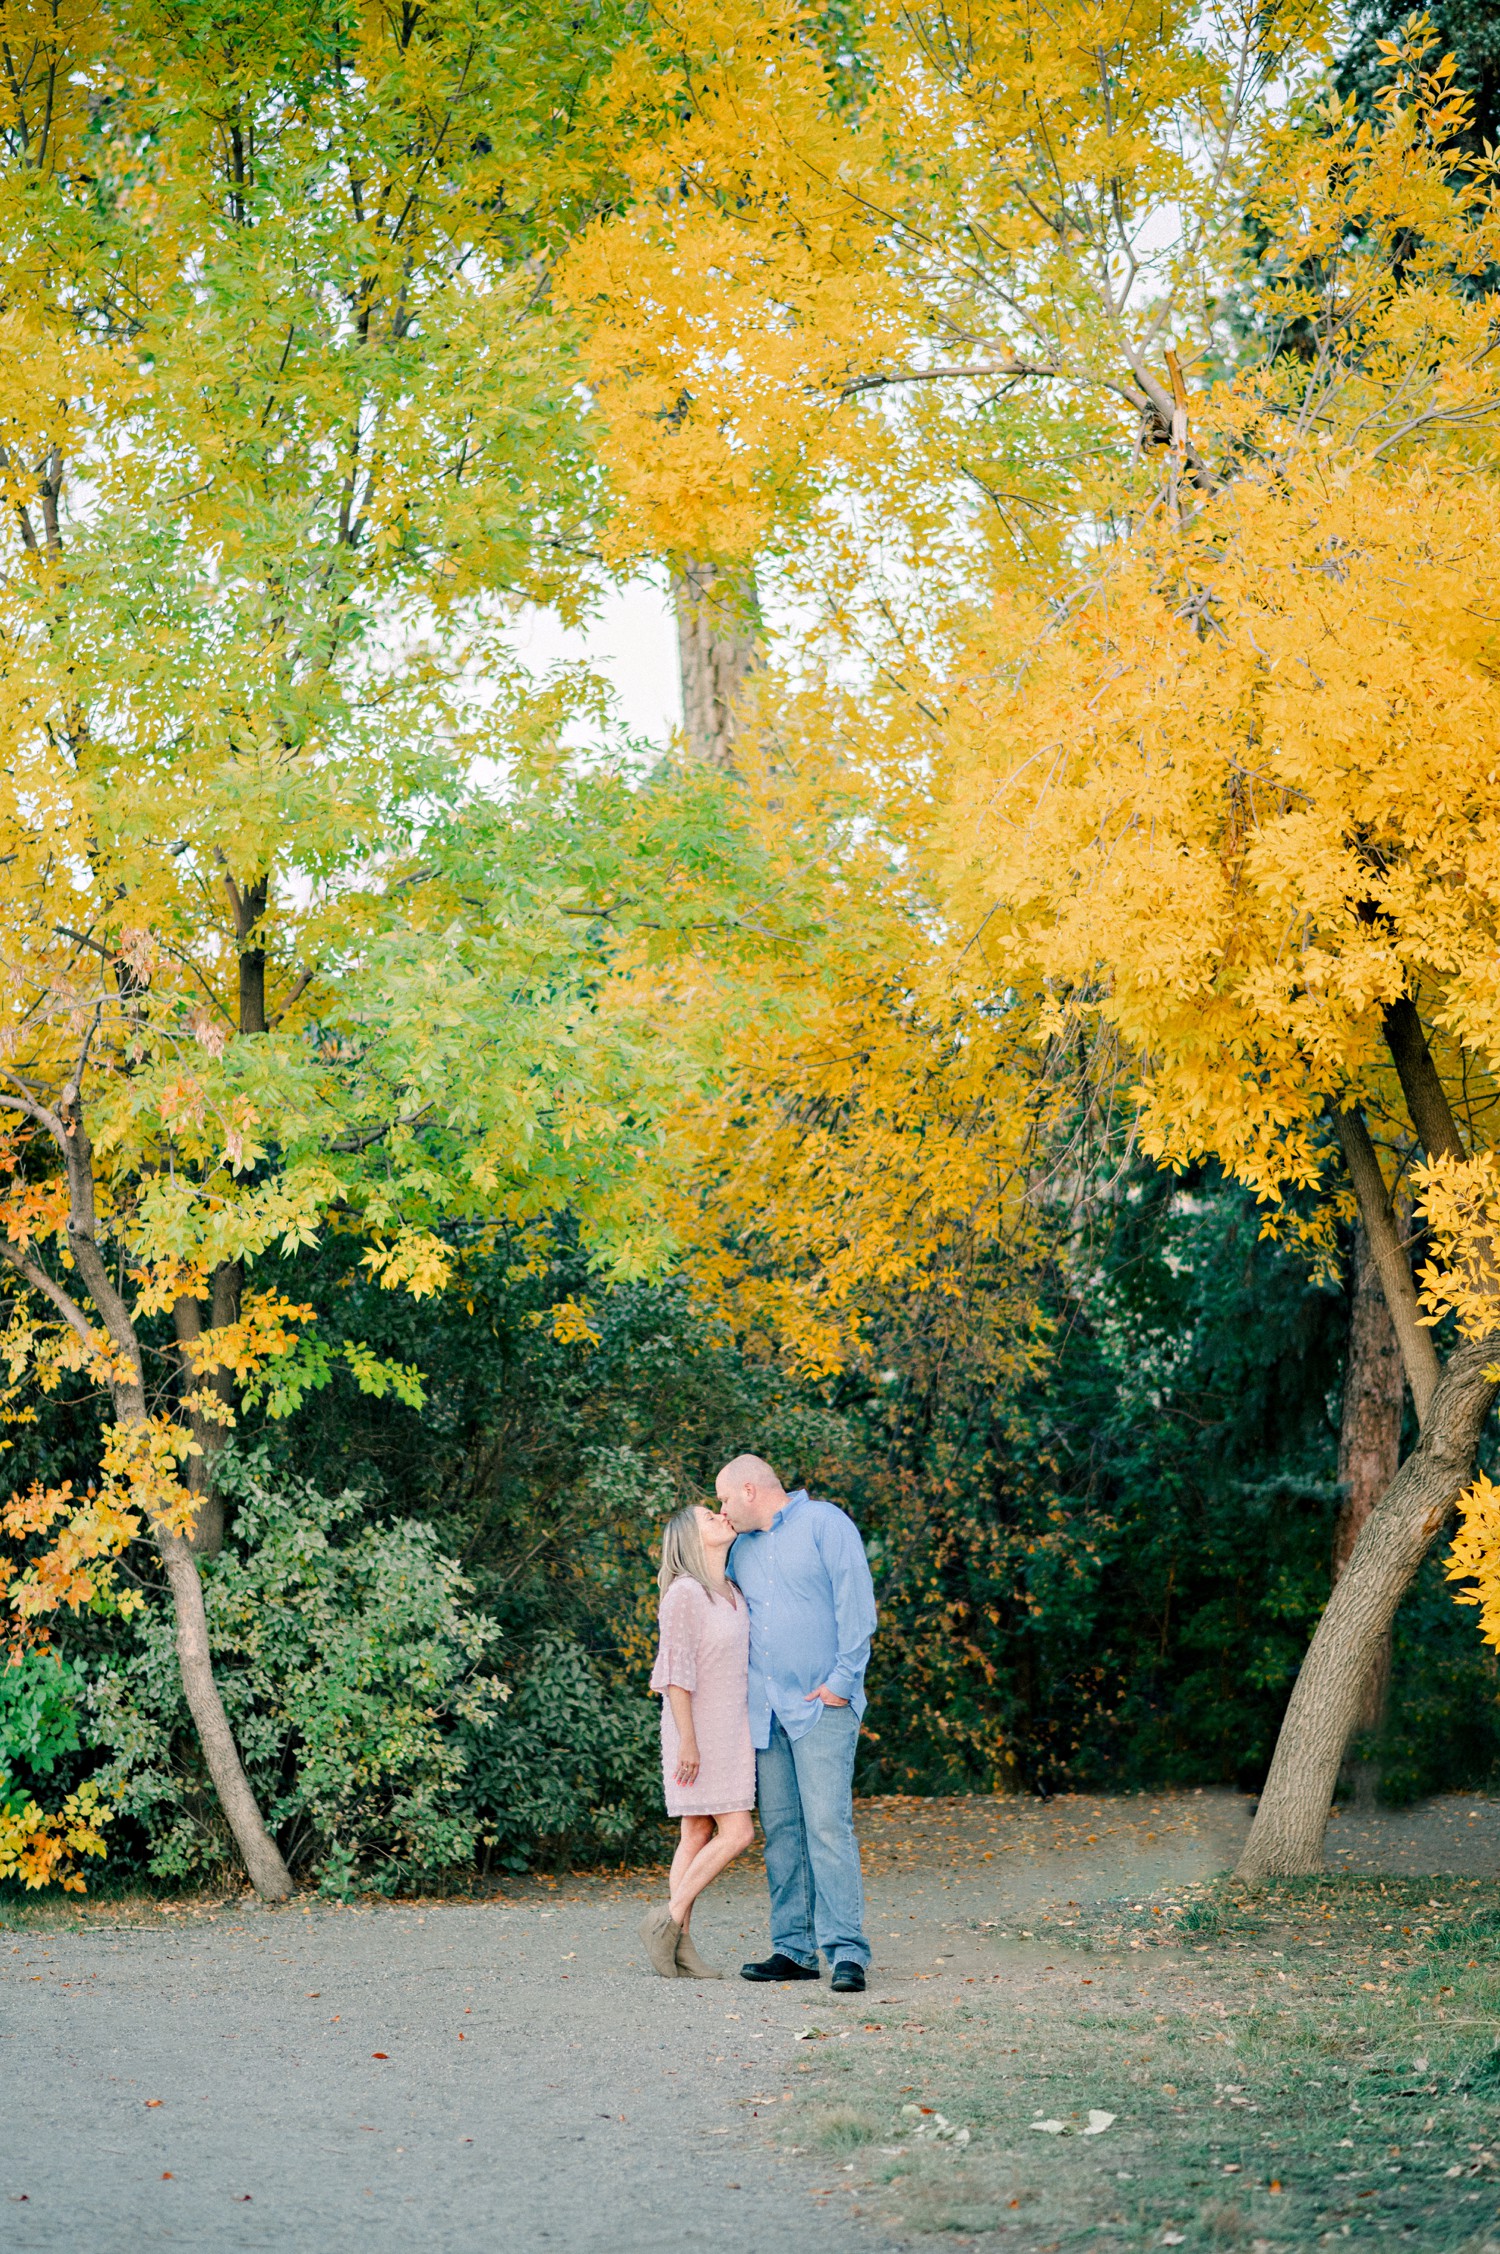 Engagement session at Fly'N B Park with fall color leaves.